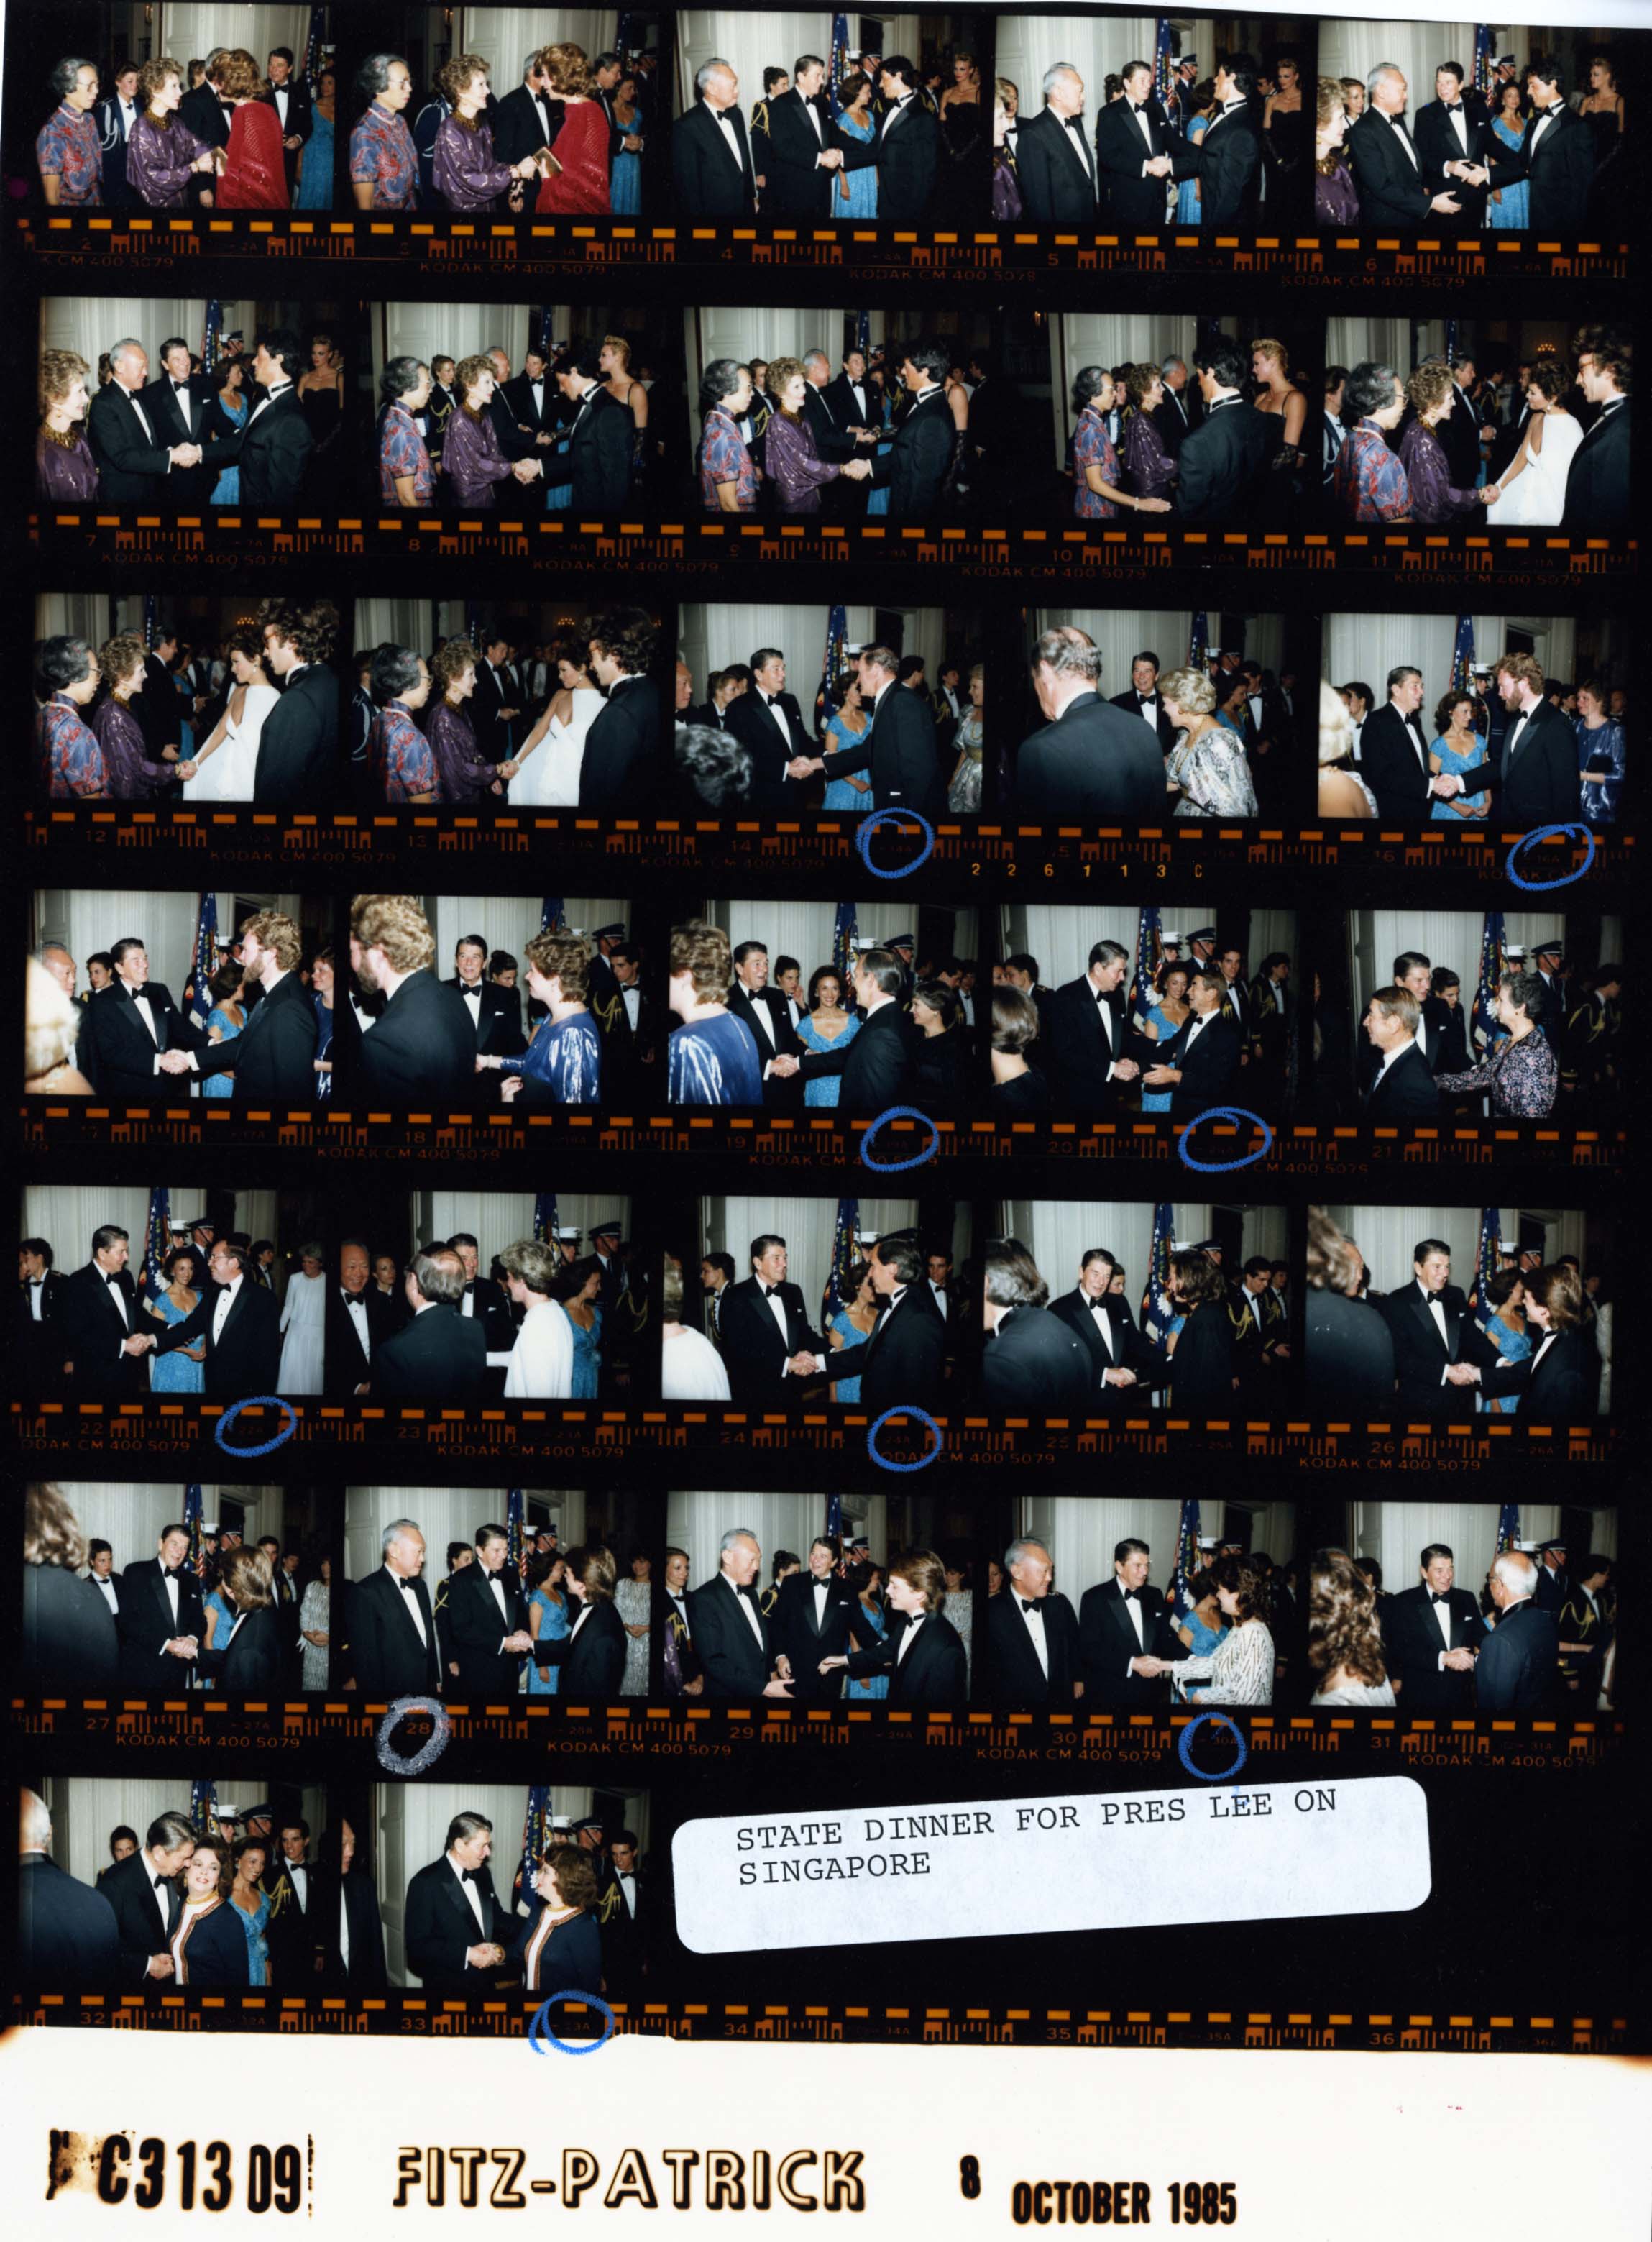 Wikipedia, Andr Weinfeld, Brigitte Nielsen, Contact sheets by the Reagan White House, Executive Off